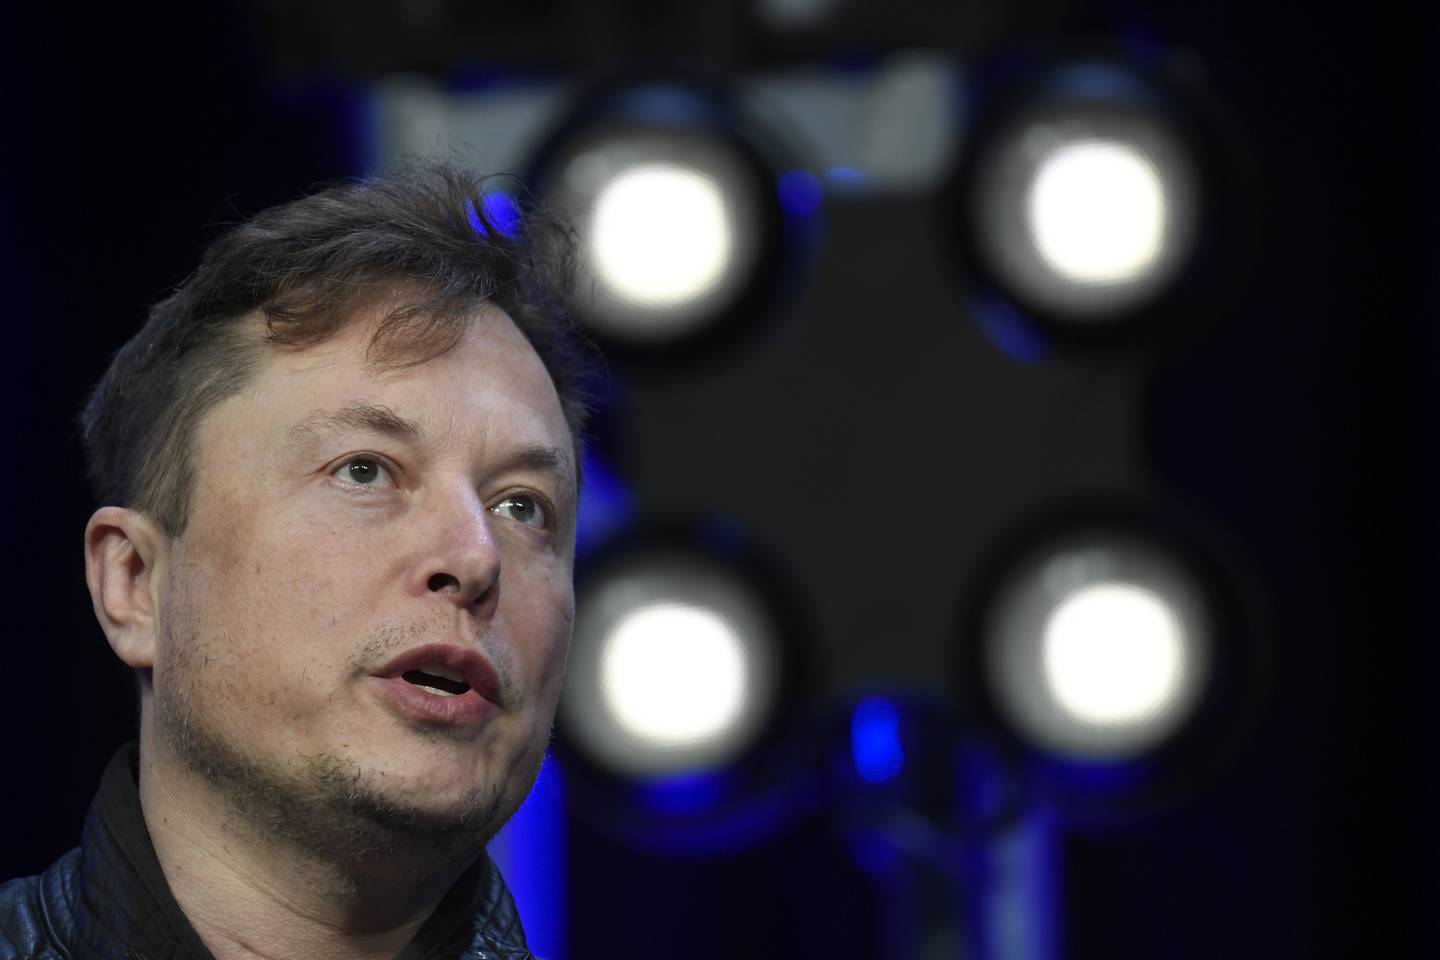 Elon Musk will make his own mobile phone if Apple and Google ban Twitter